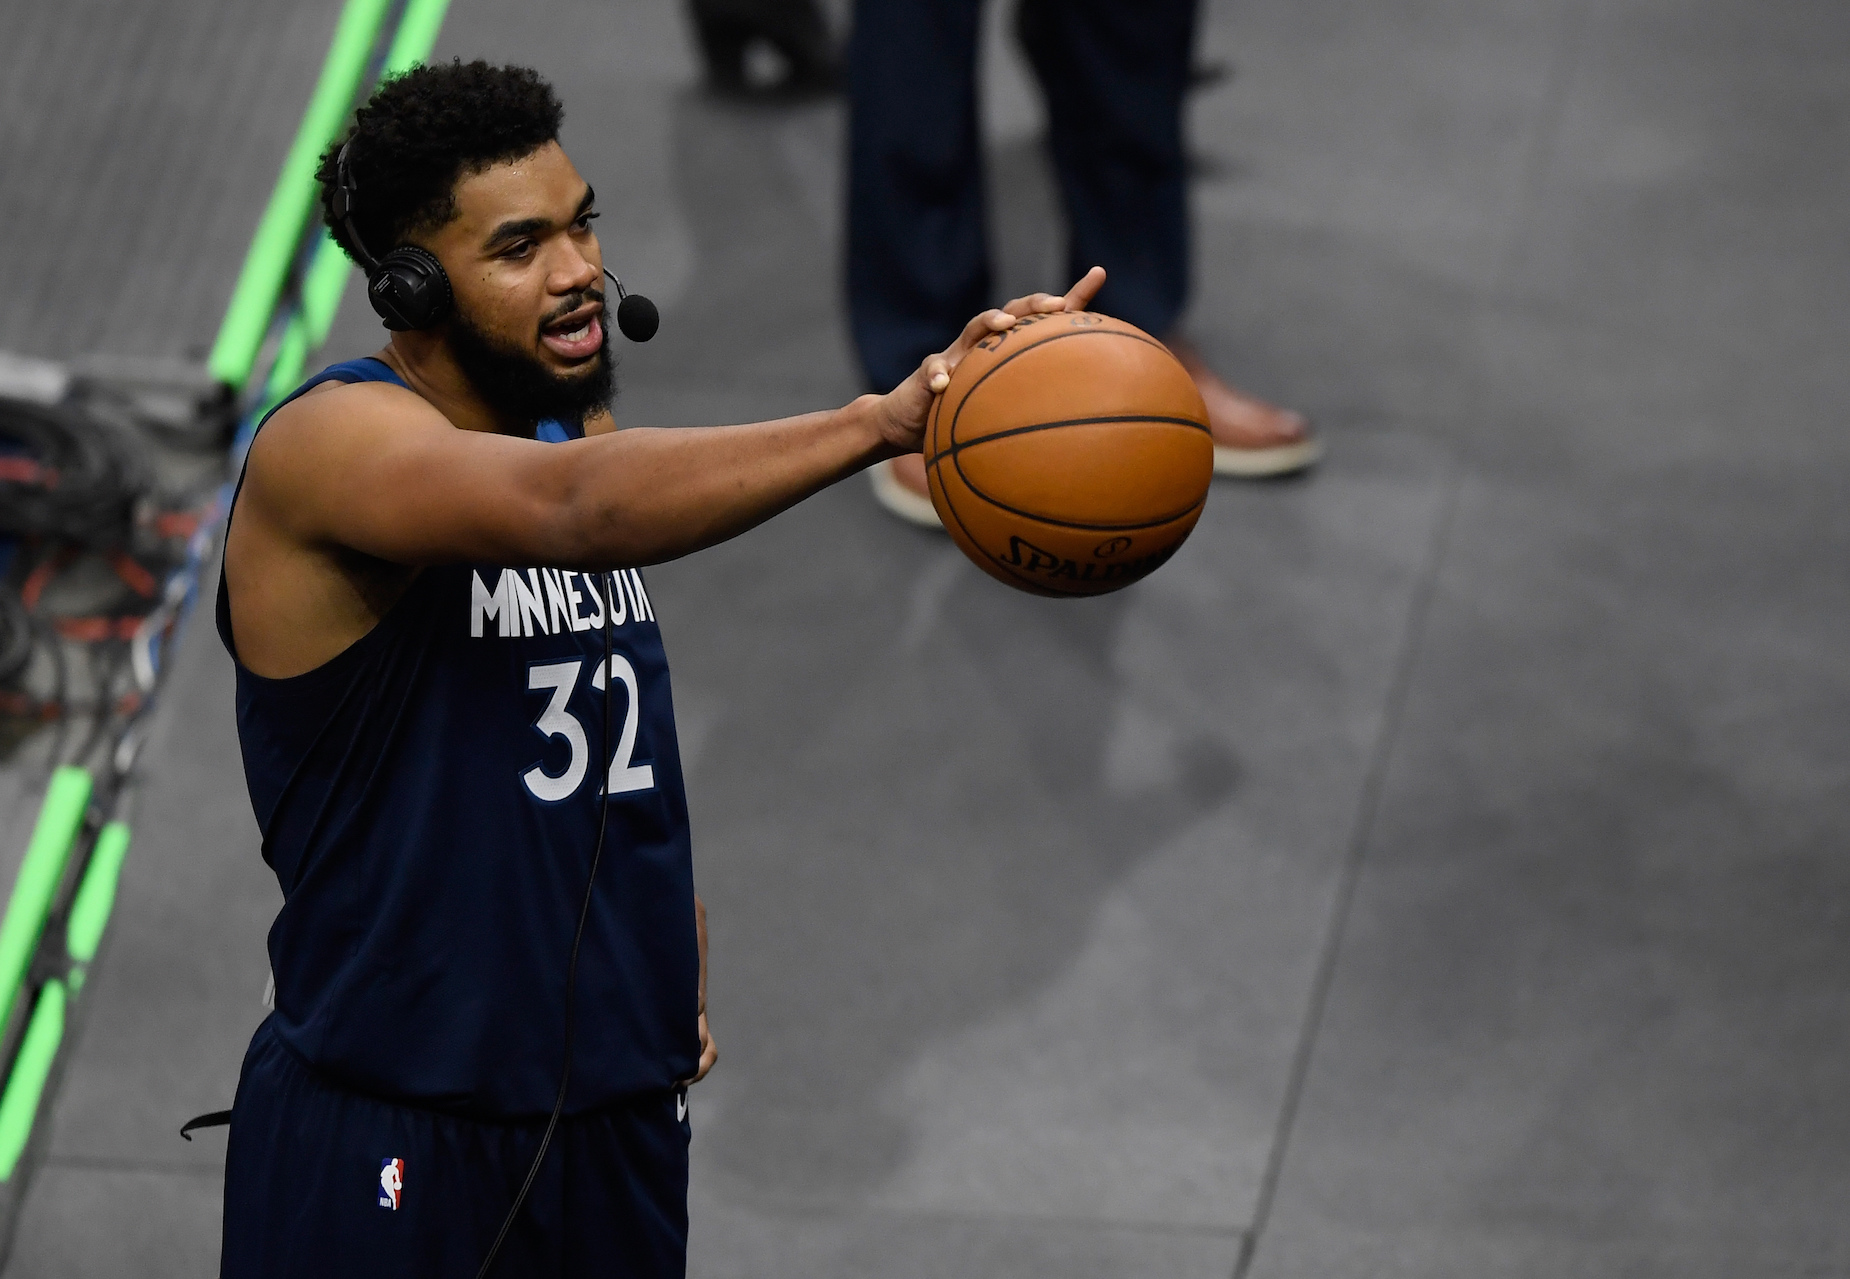 Minnesota Timberwolves big man Karl-Anthony Towns will never be the same after his tragic 2020.